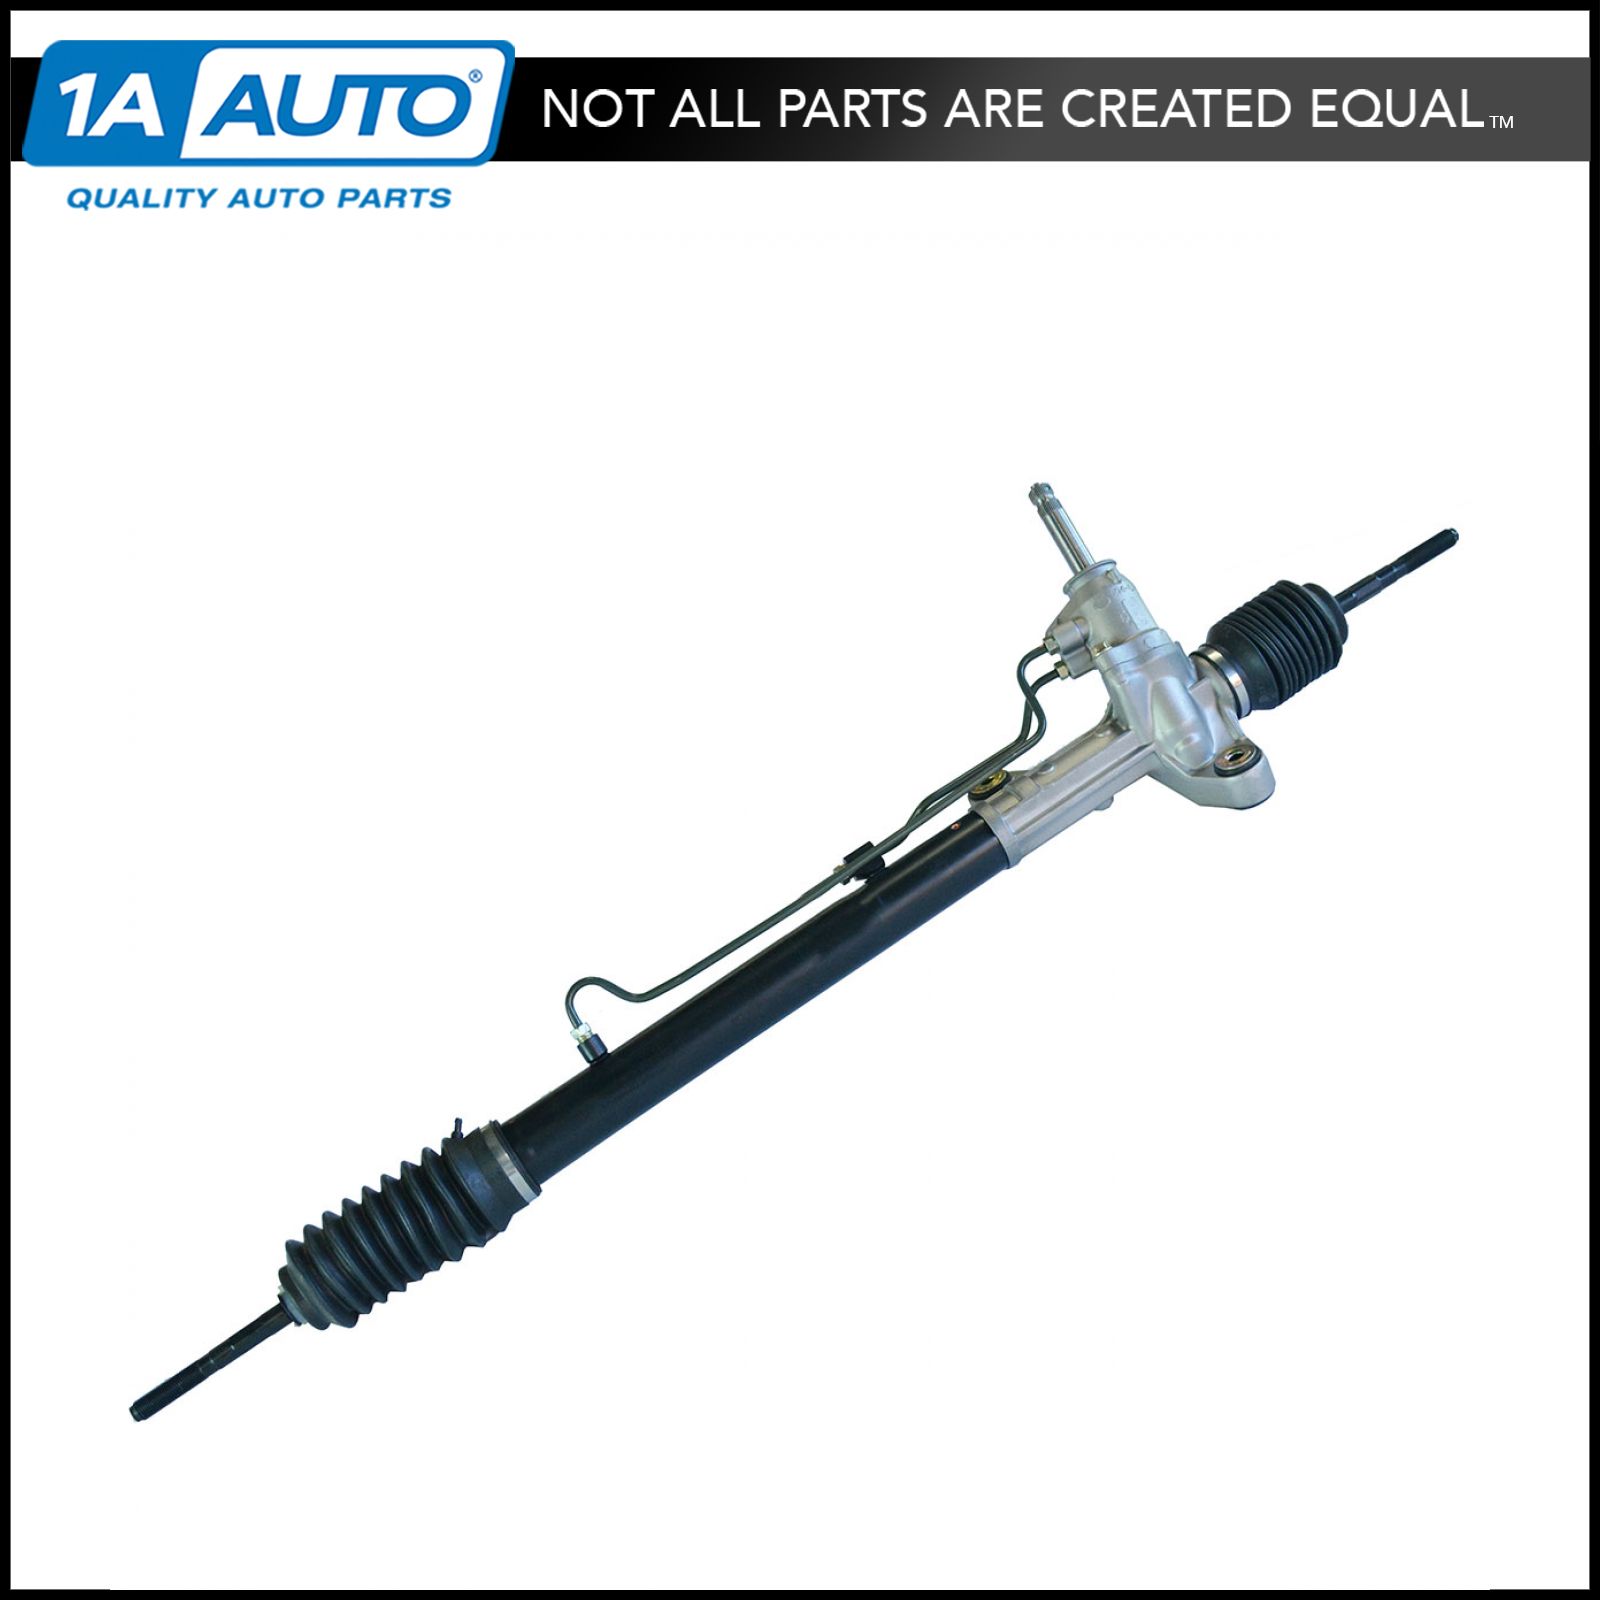 Complete Power Steering Rack and Pinion 1996 1997 1998 1999 2000 Honda Civic